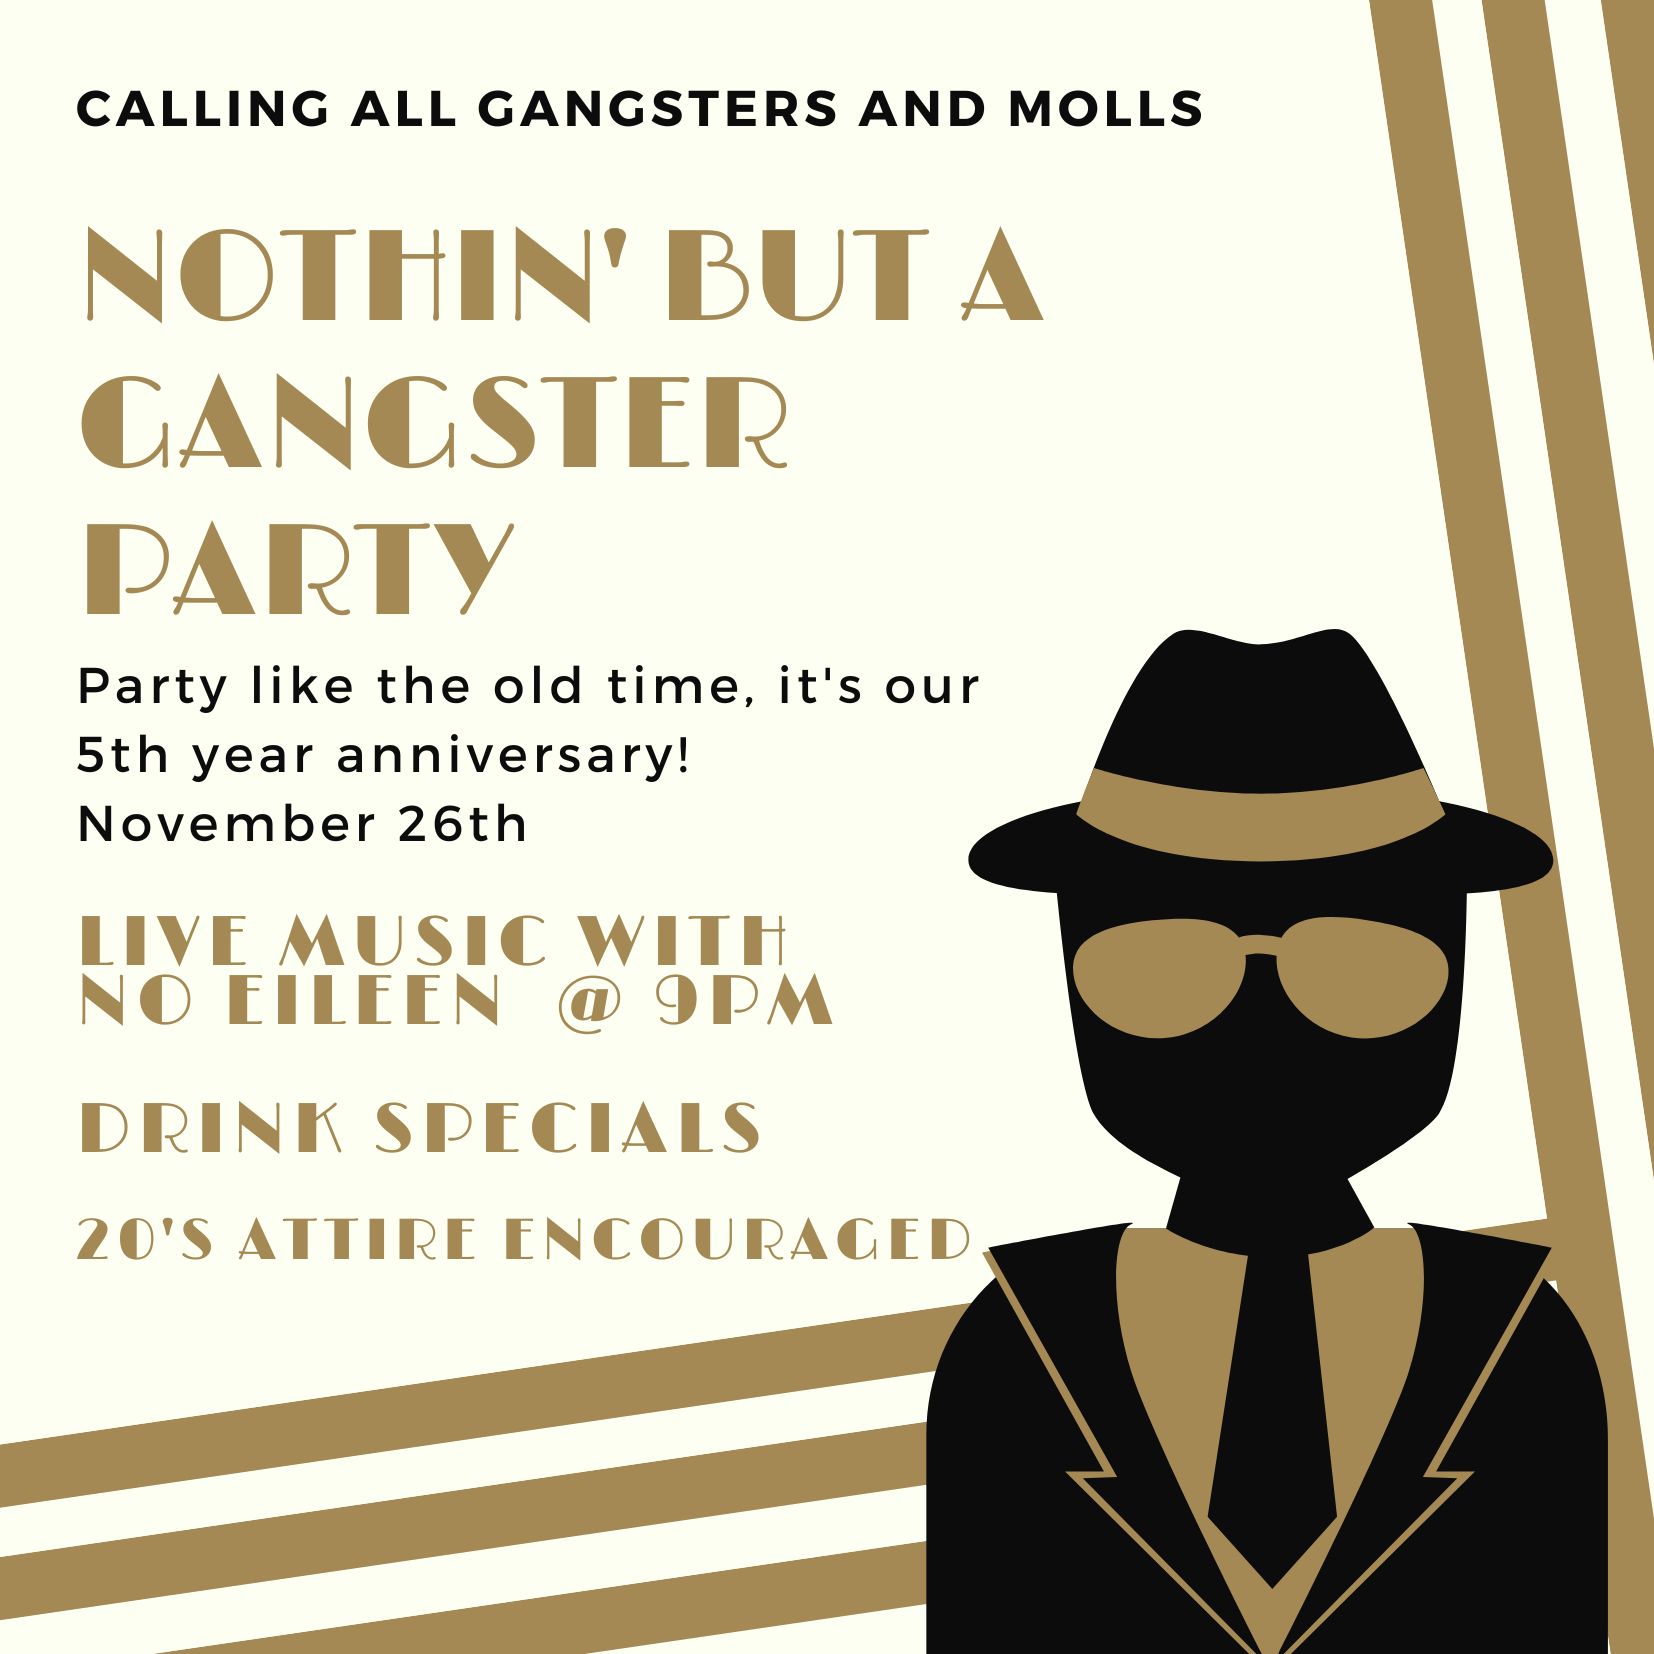 Nothin' But a Gangster Party